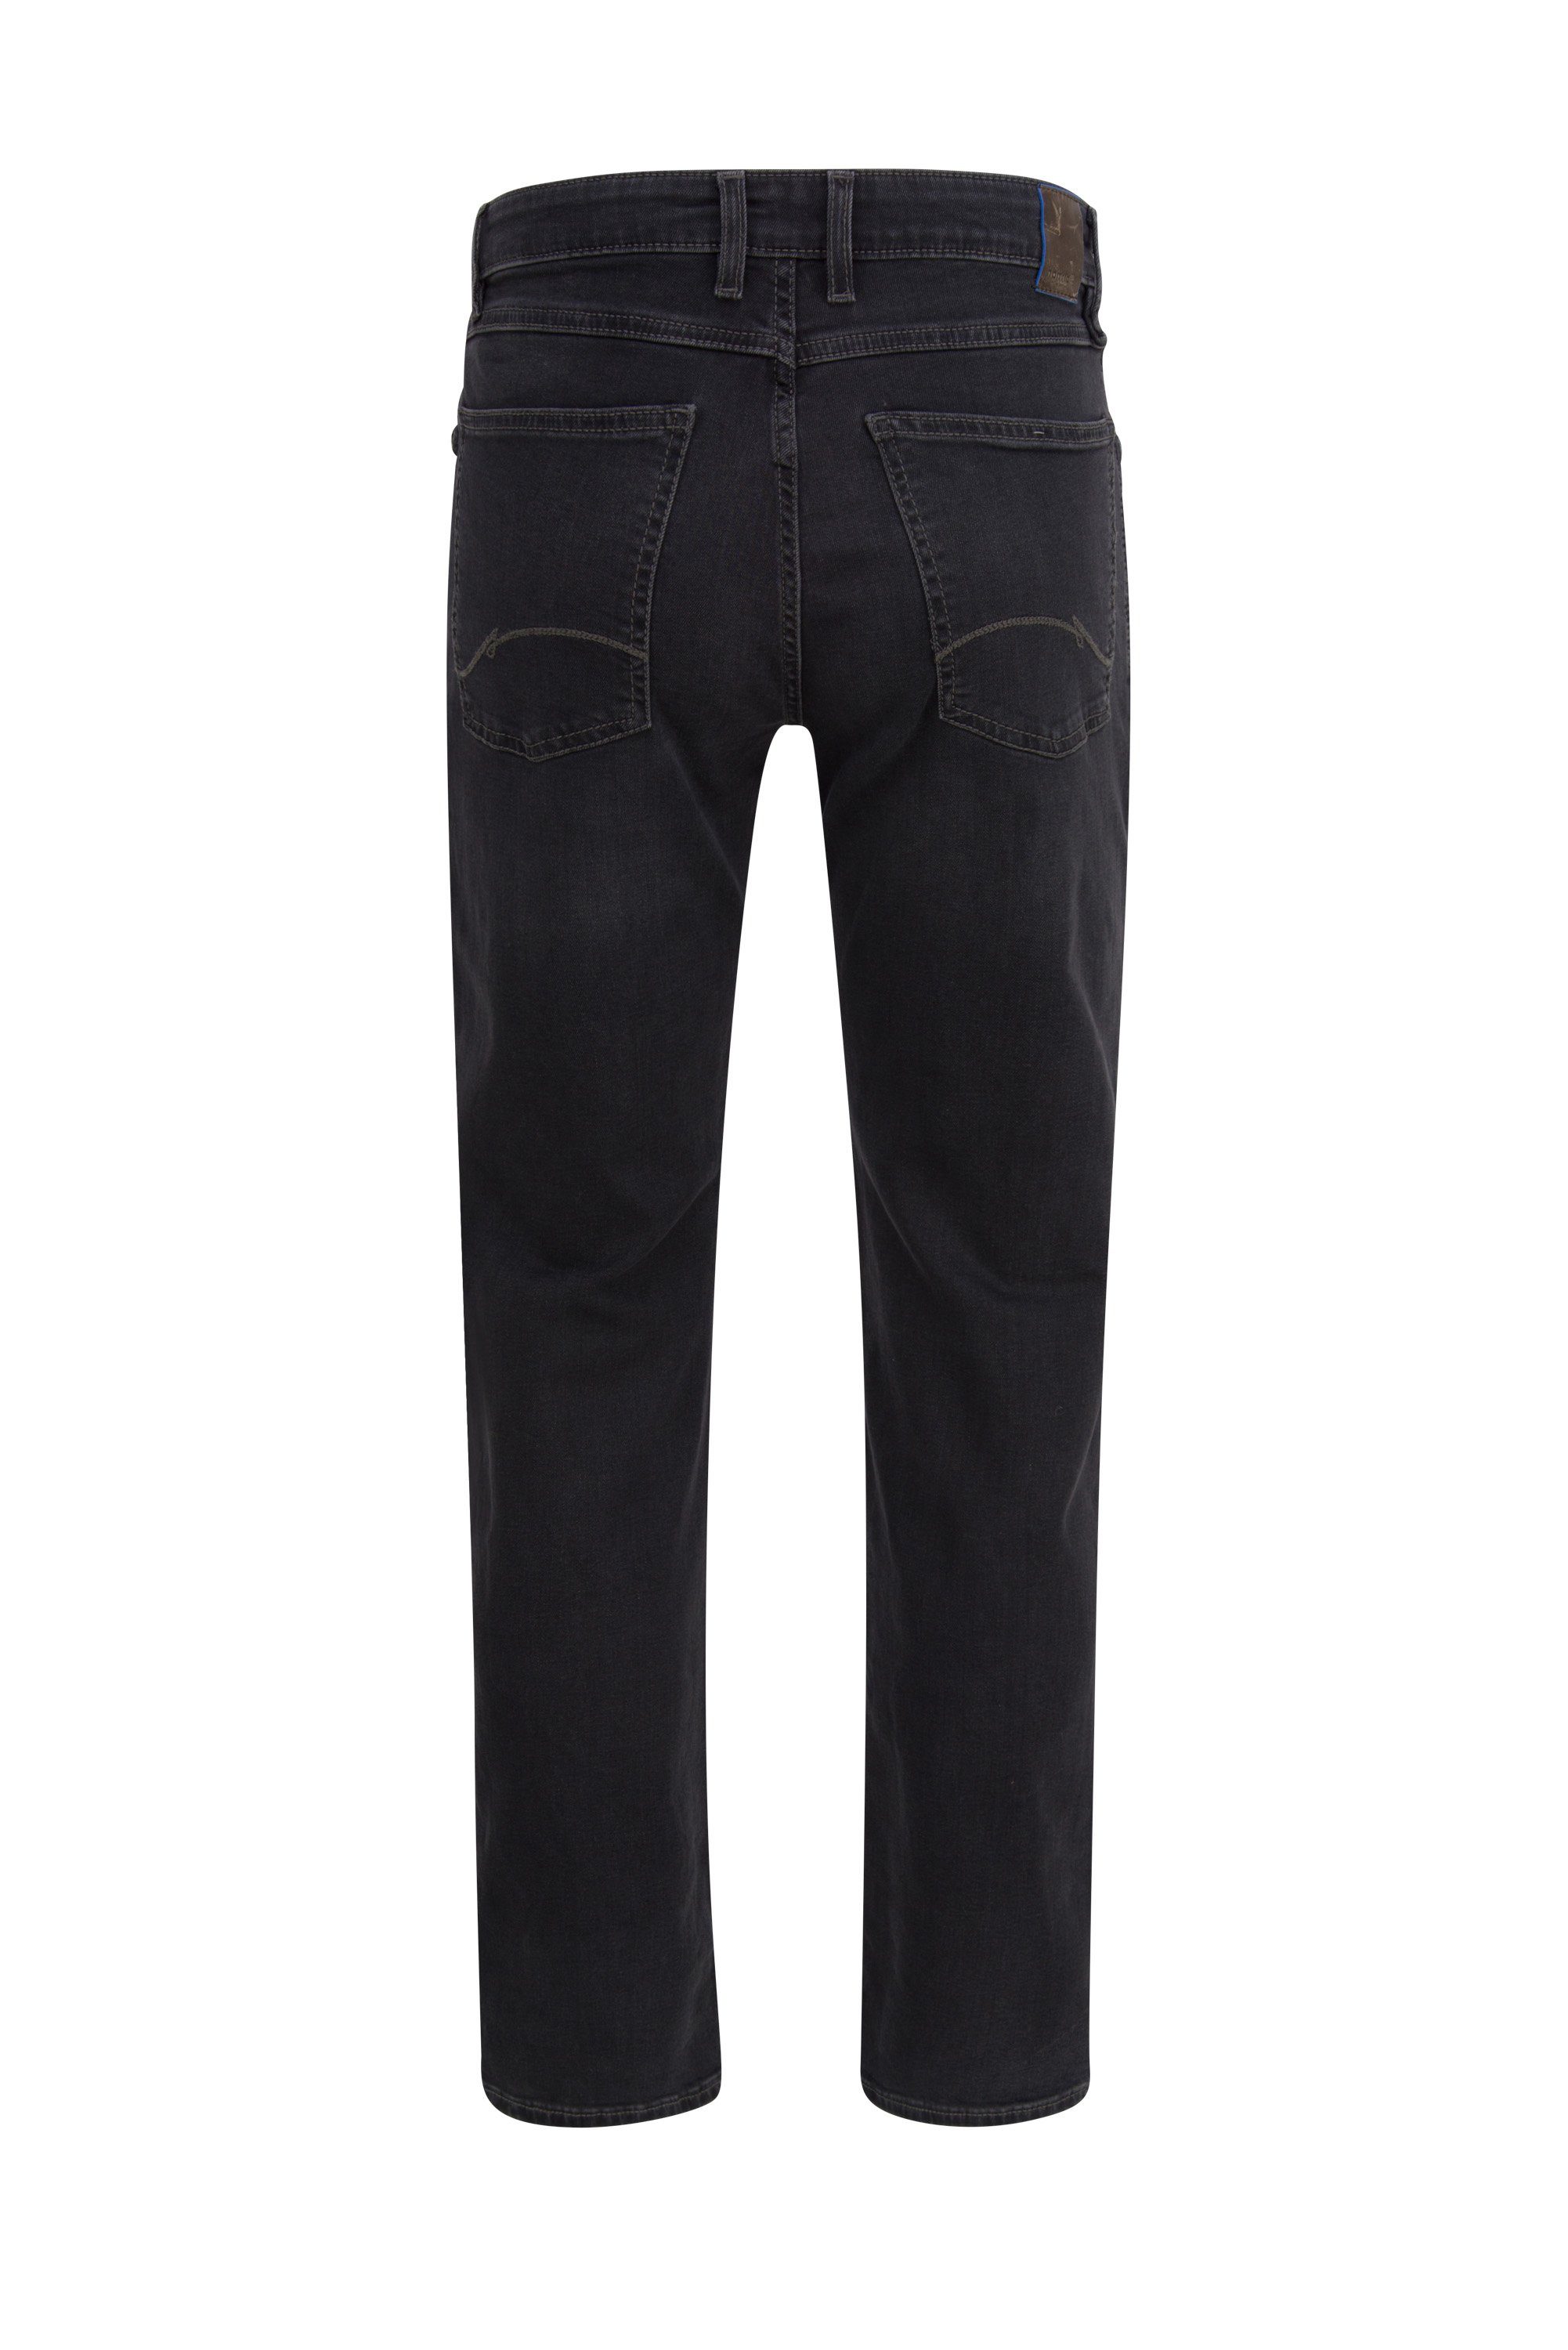 Hattric anthracite 688465 5-Pocket-Jeans out dark HATTRIC - 6350.08 HUNTER HIGH-STRETC washed